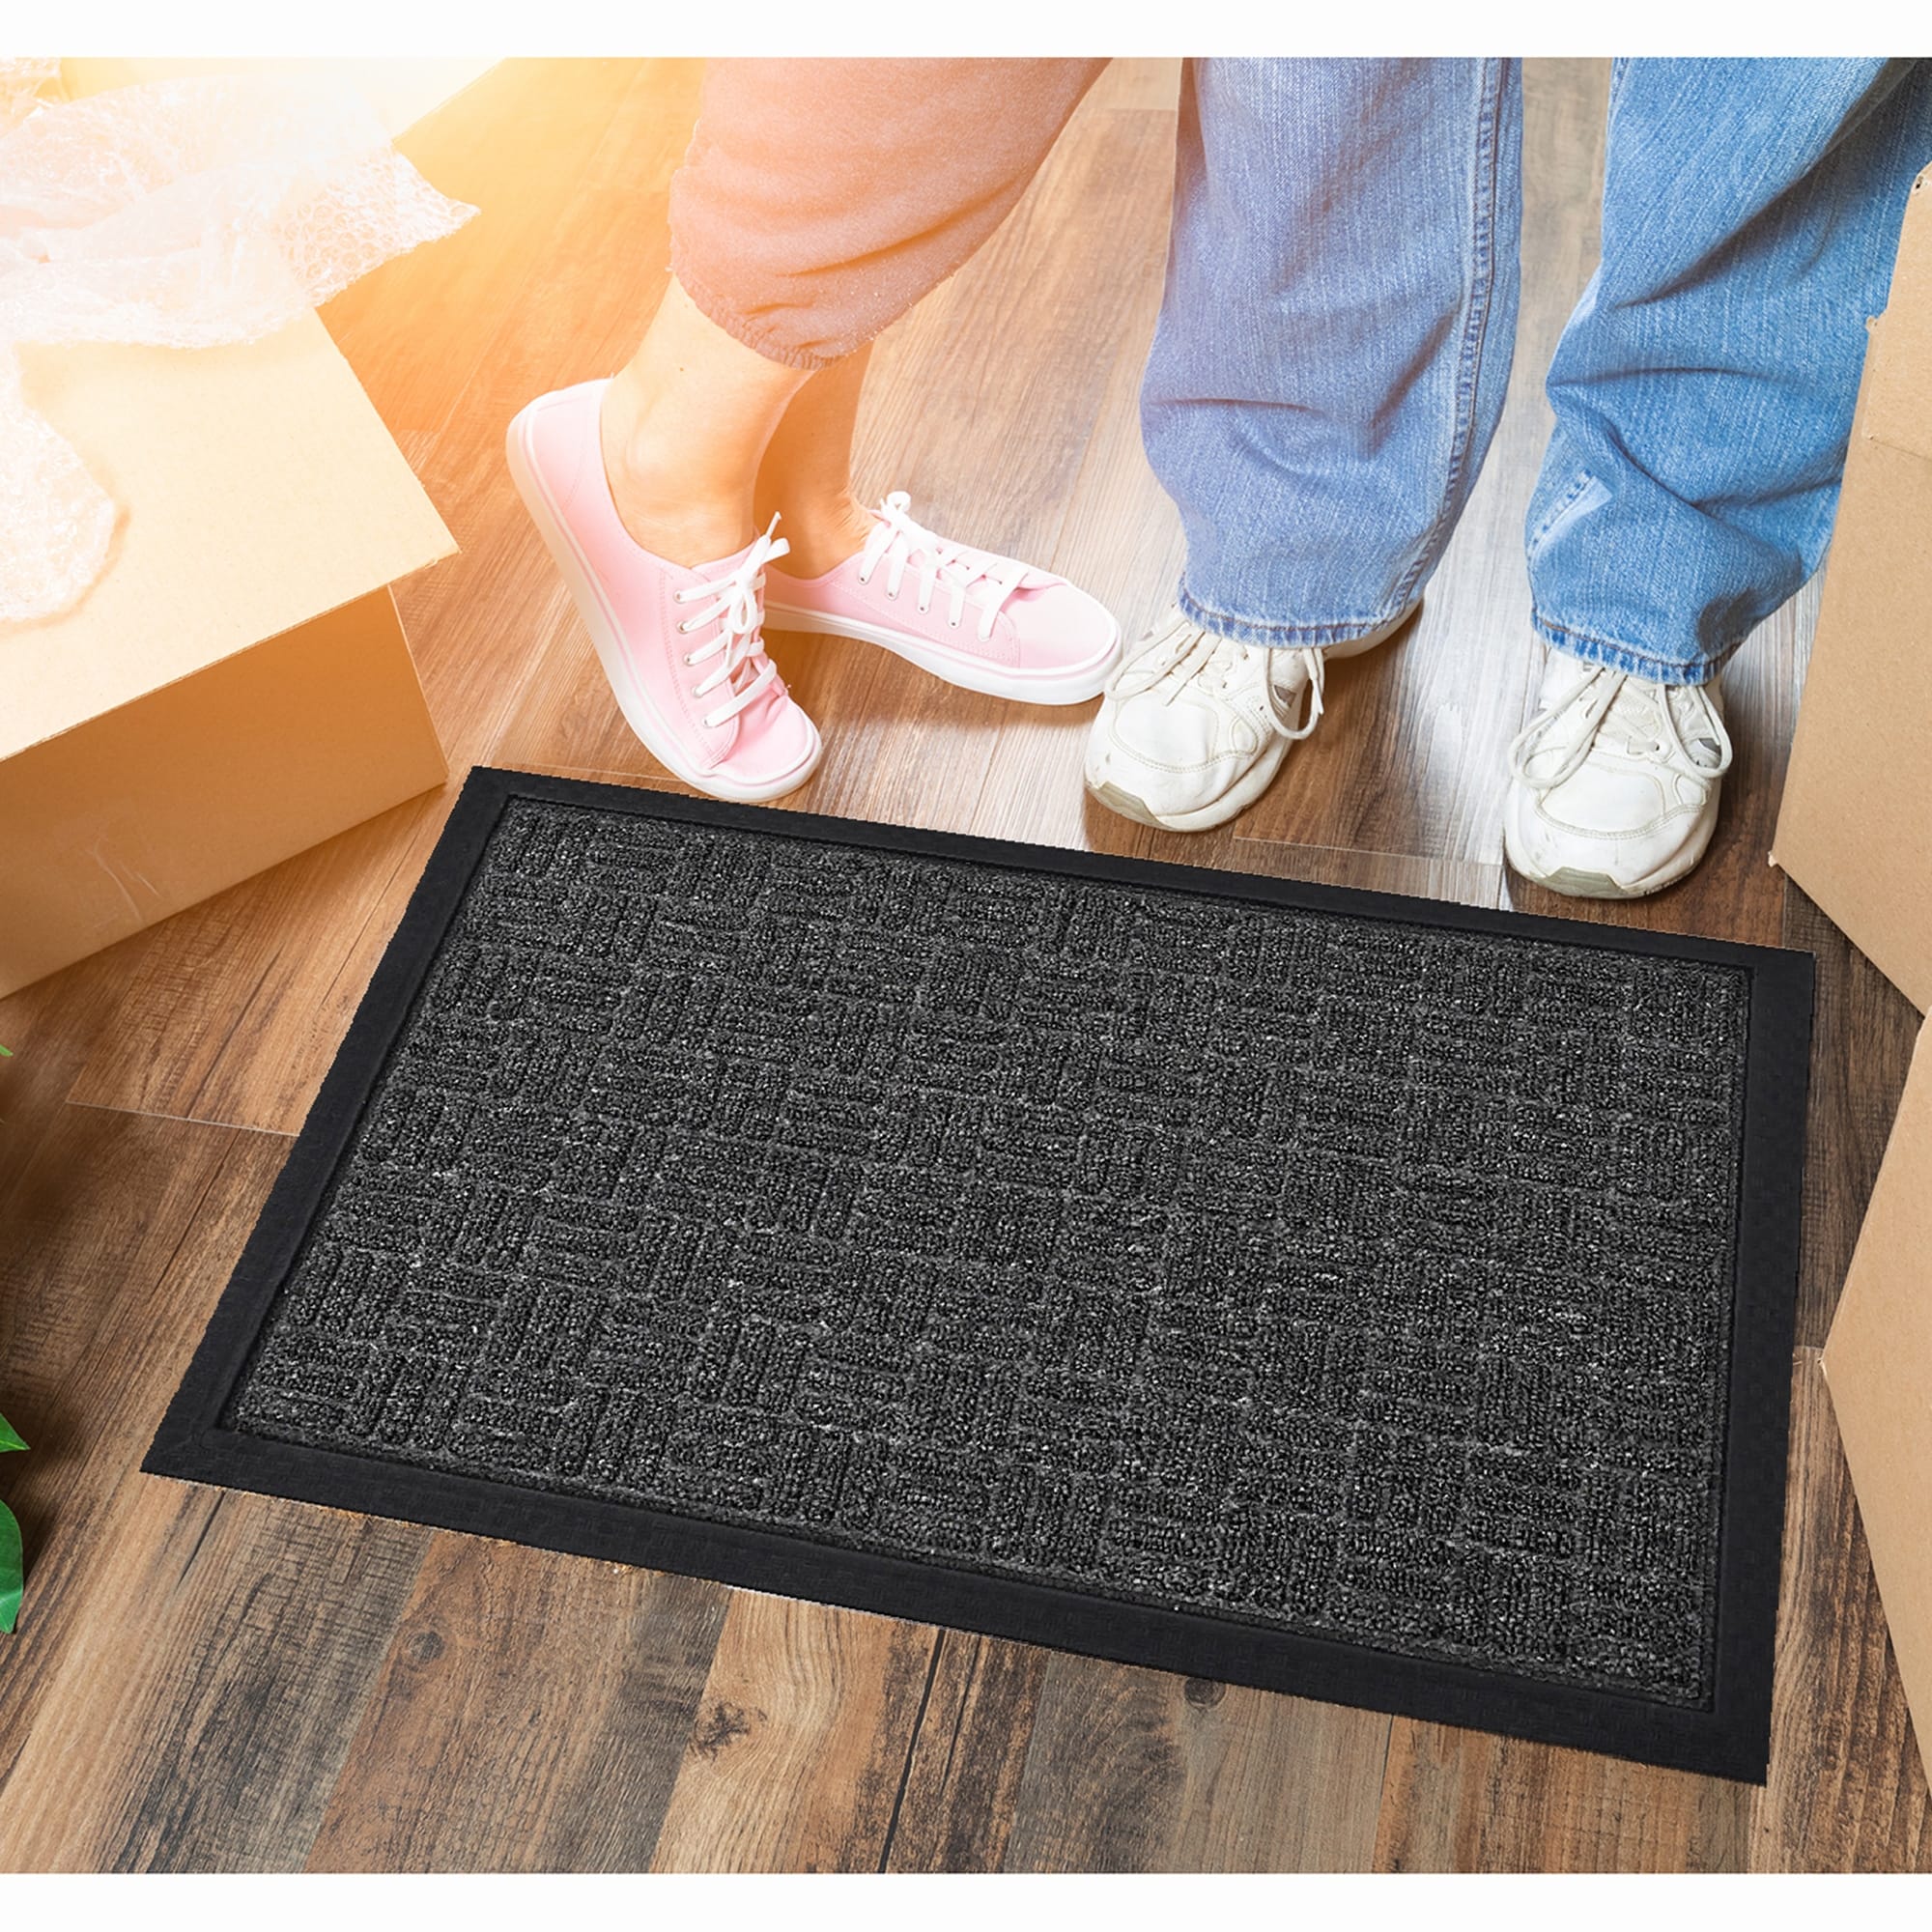 https://ak1.ostkcdn.com/images/products/is/images/direct/dd051ffa891e45e50d054538f0a28d40eb645a0c/Outdoor-Front-Door-Mat-Checkerboard-Yvan-Polypropylene-Rubber-Rug-Grey.jpg